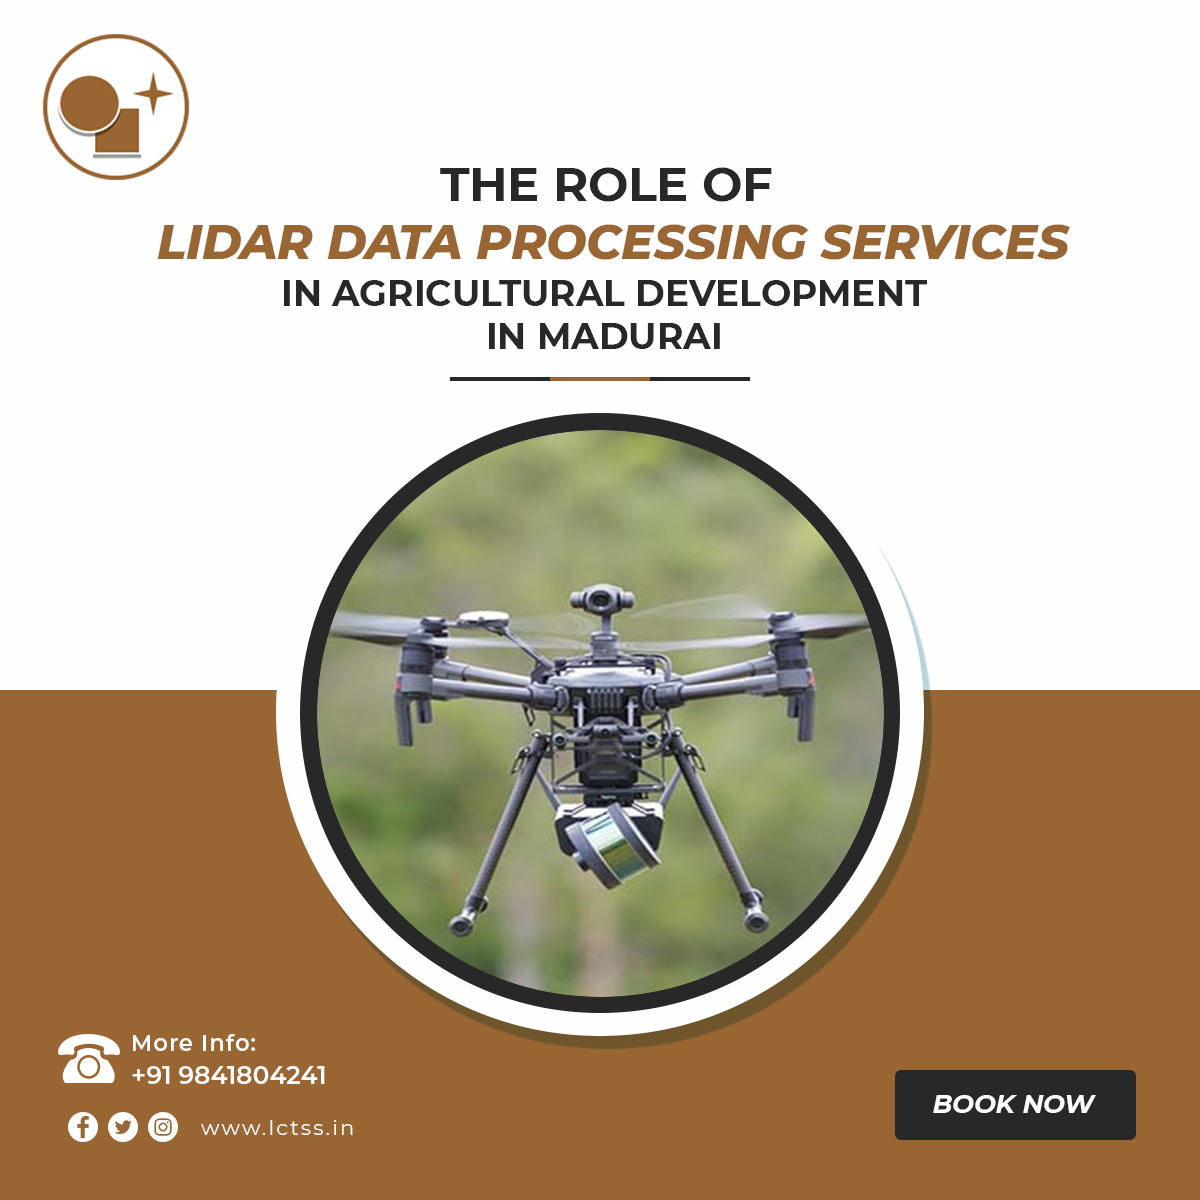 Lidar Data Processing Services in Agricultural Development in Madurai